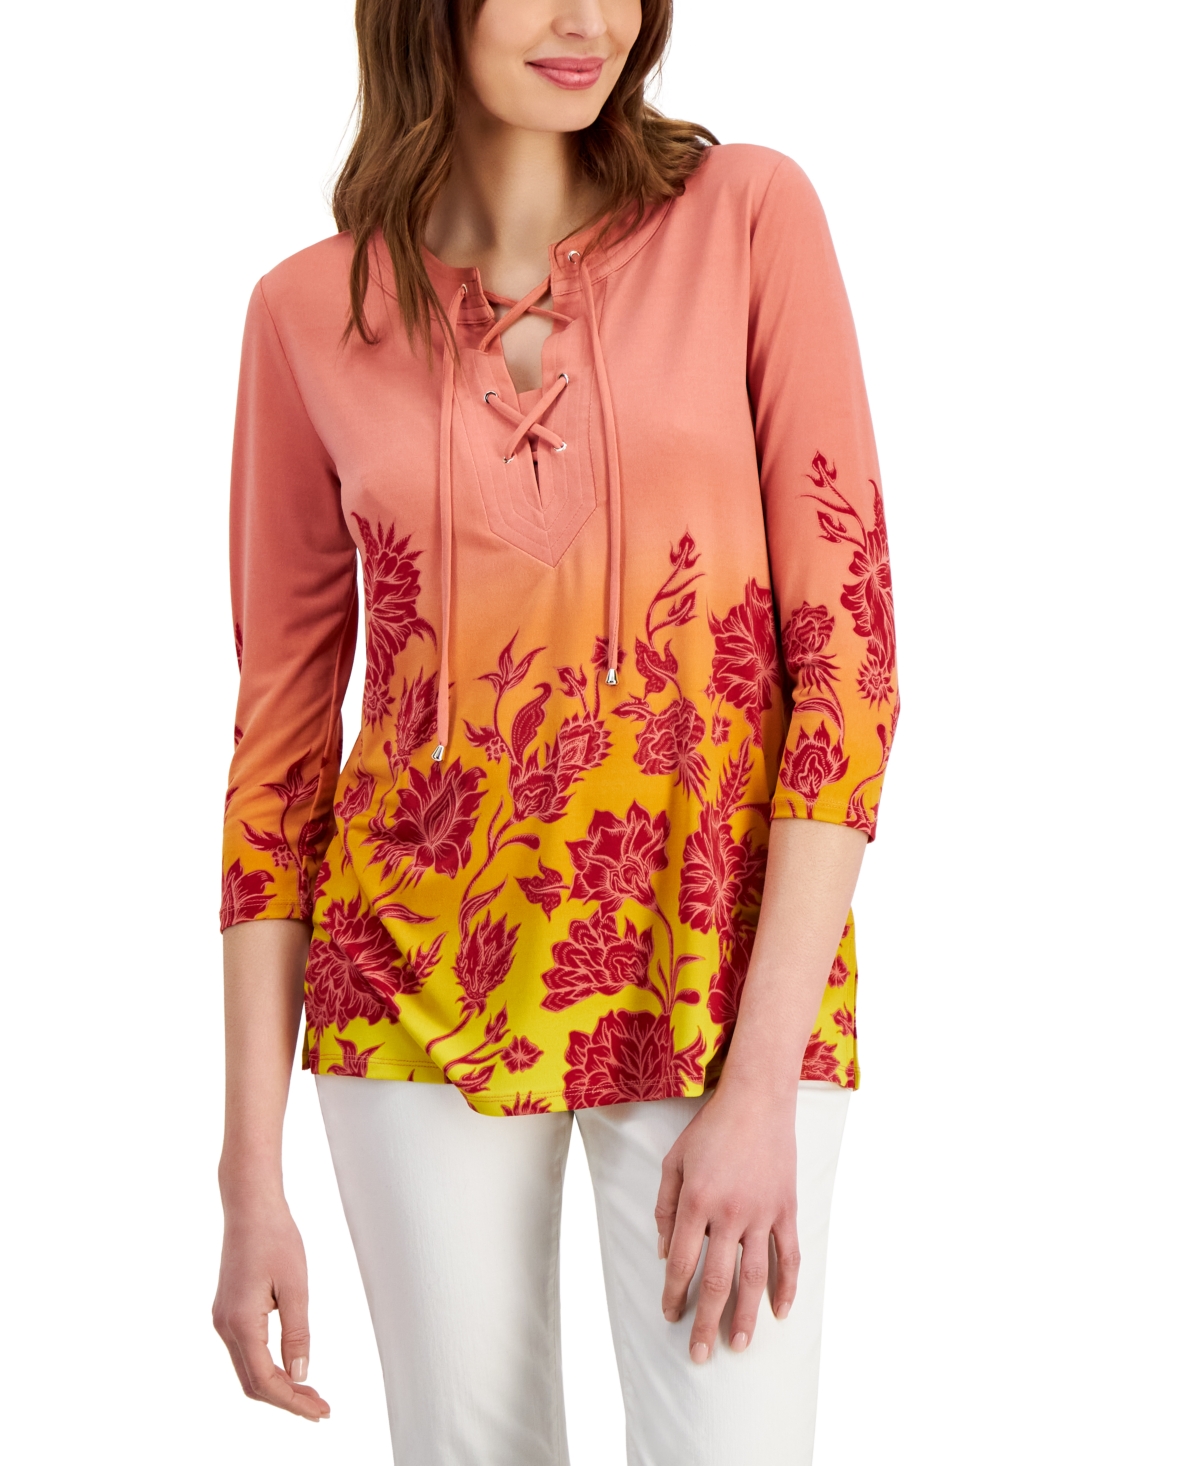 Petite Garden Lace-Up 3/4-Sleeve Tunic Top, Created for Macy's - Burnt Brick Combo